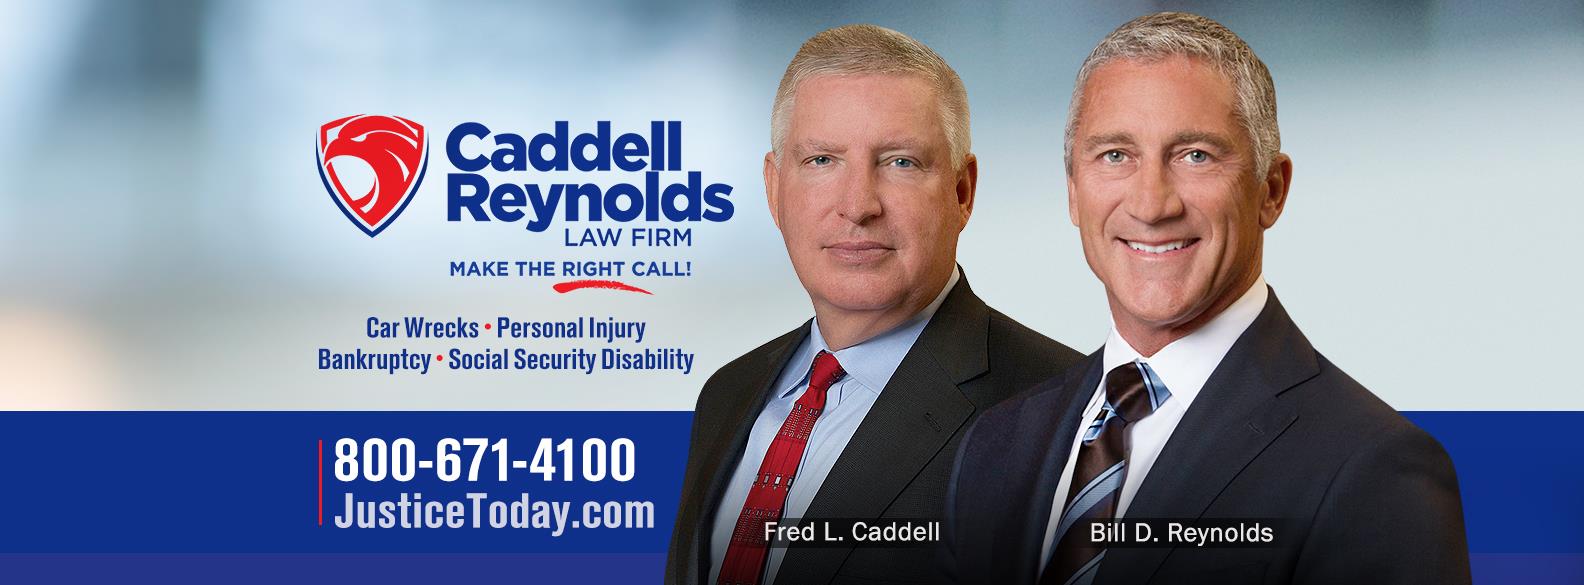 Caddell Reynolds Law Firm - Fayetteville (AR 72703), US, social security disability